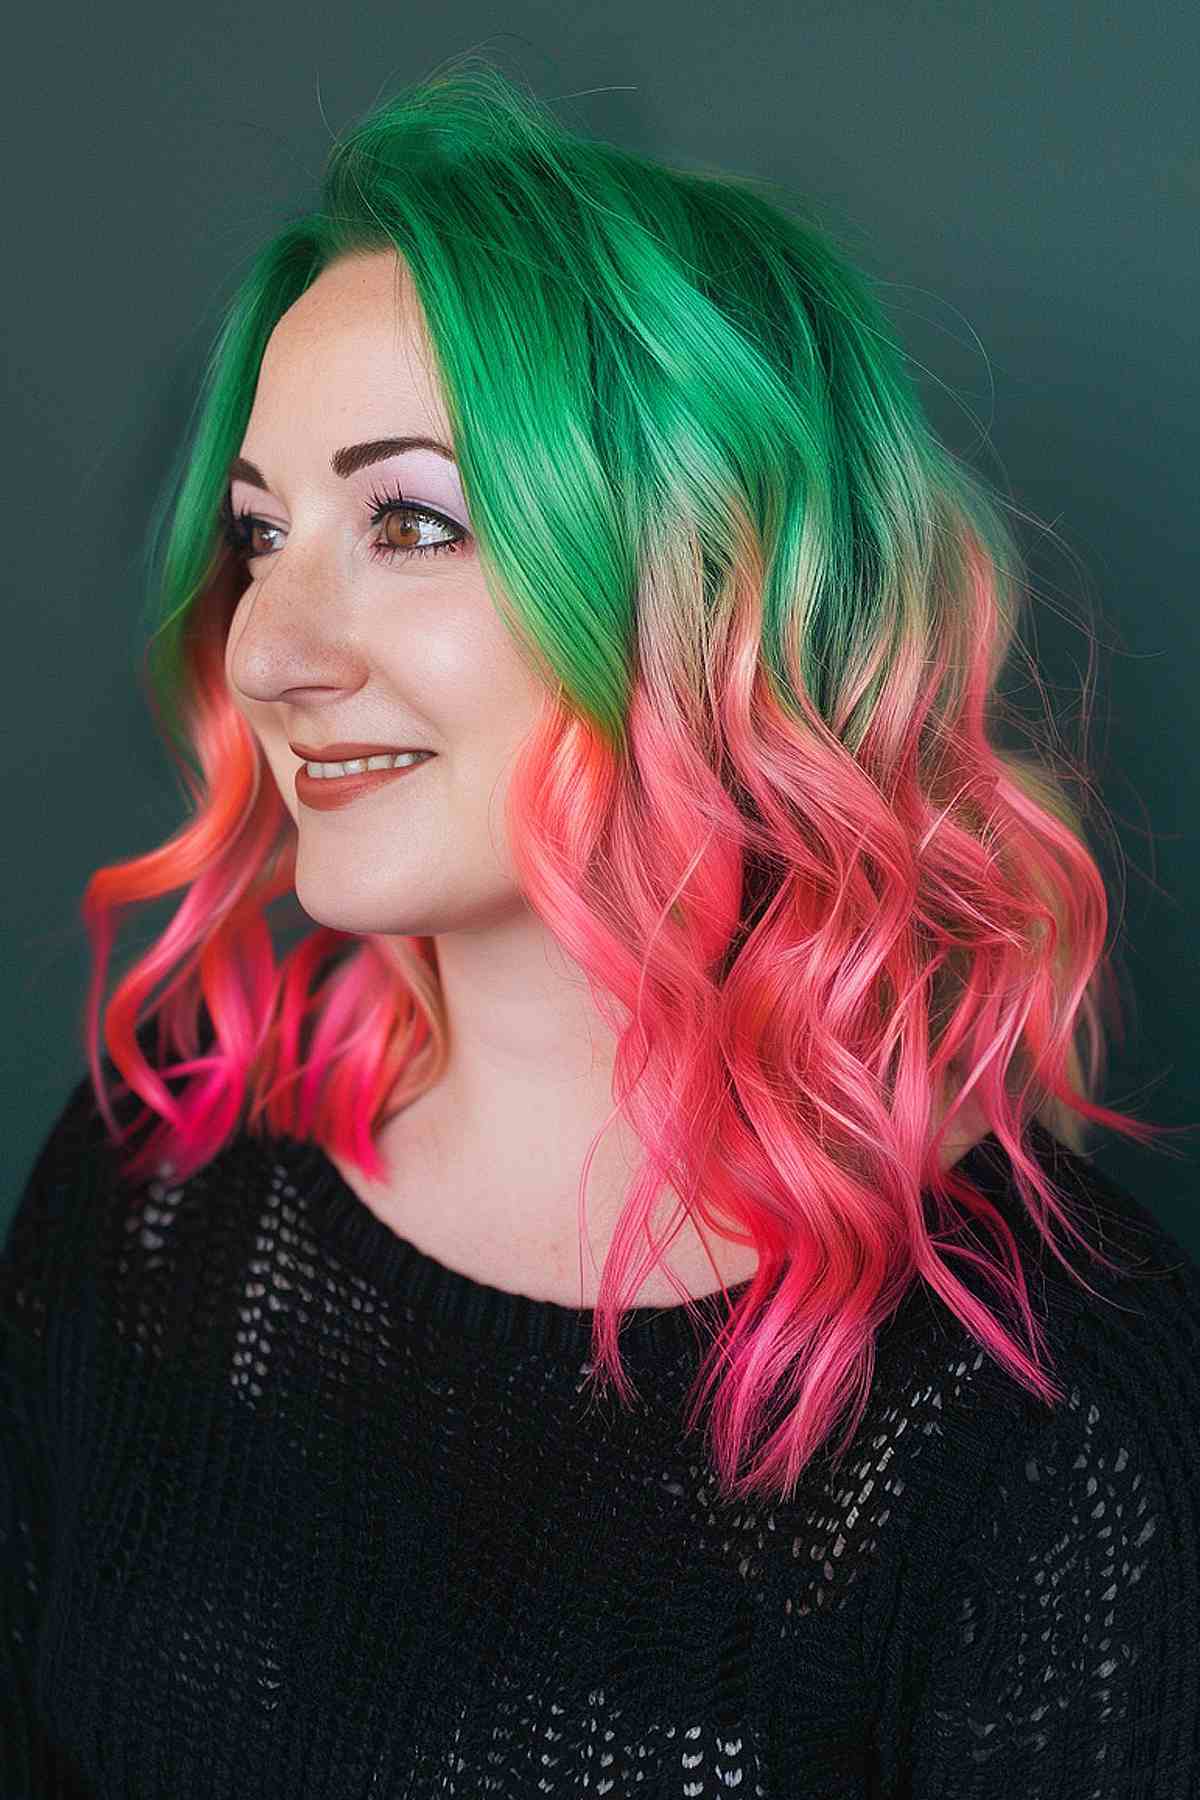 Wavy medium-length hair featuring a vibrant watermelon ombre, with green roots blending into pink ends, styled to showcase the bold color transition.